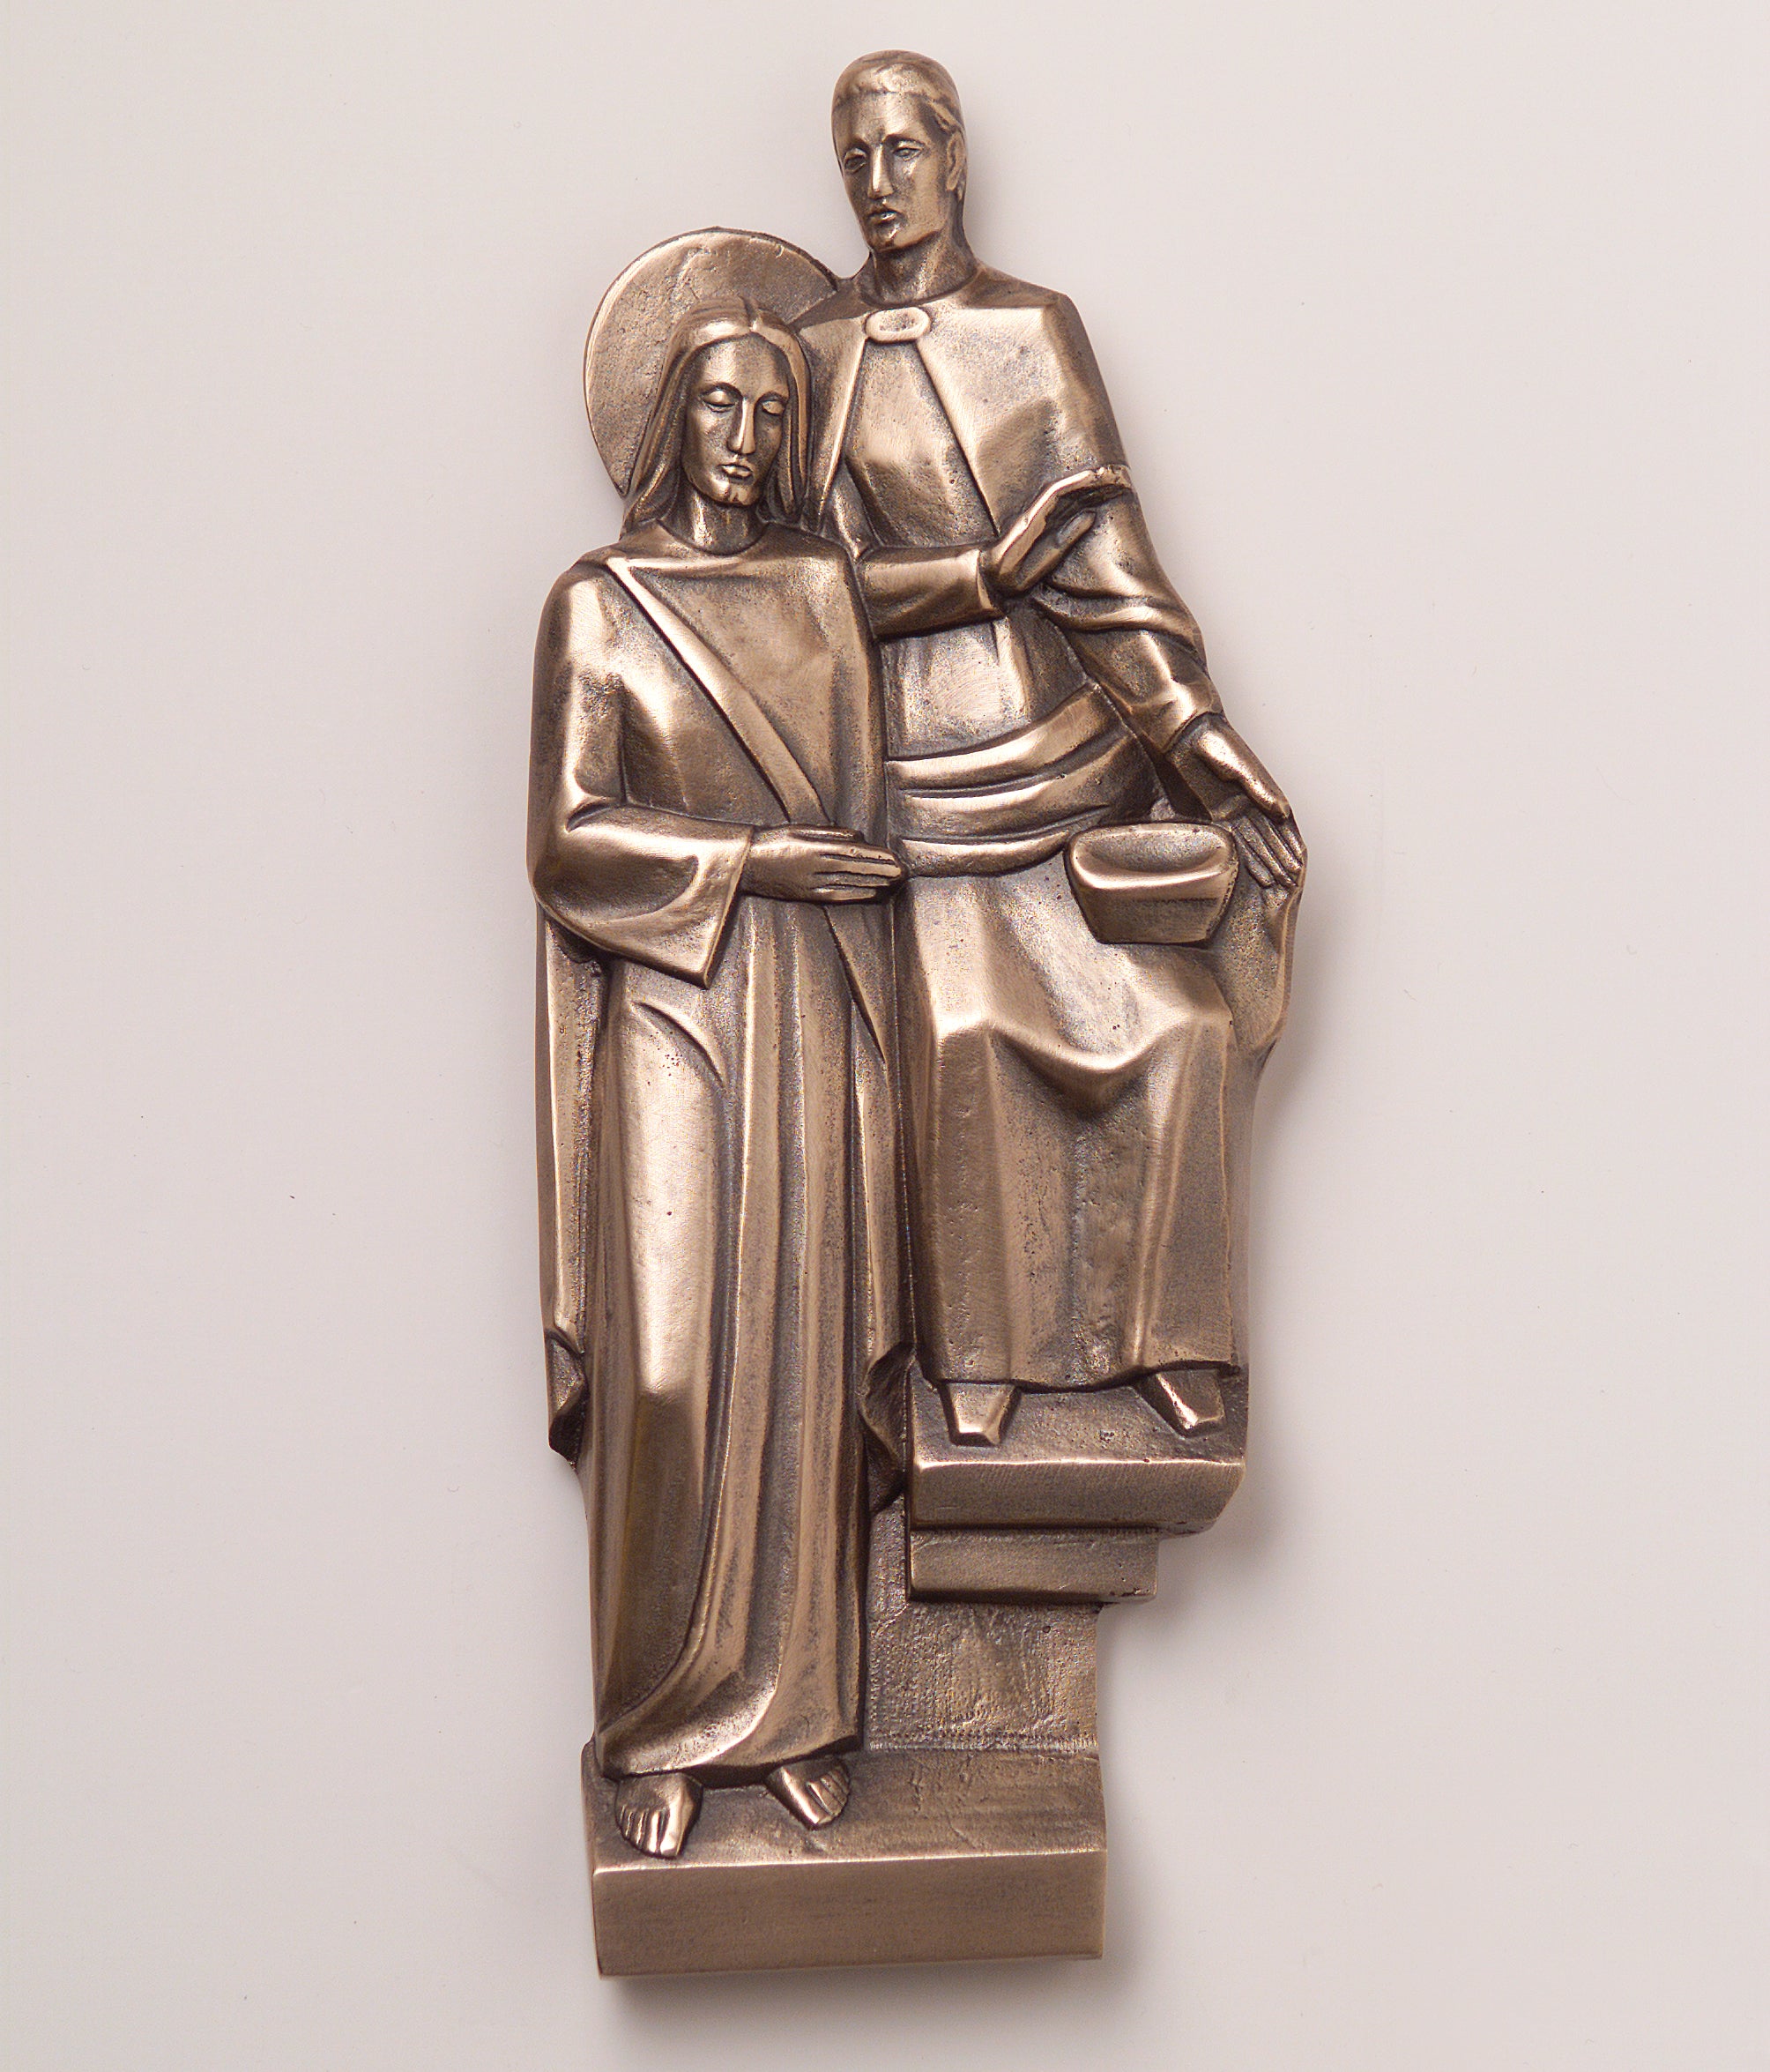 Stations of the Cross | 7" x 12" | Bronze